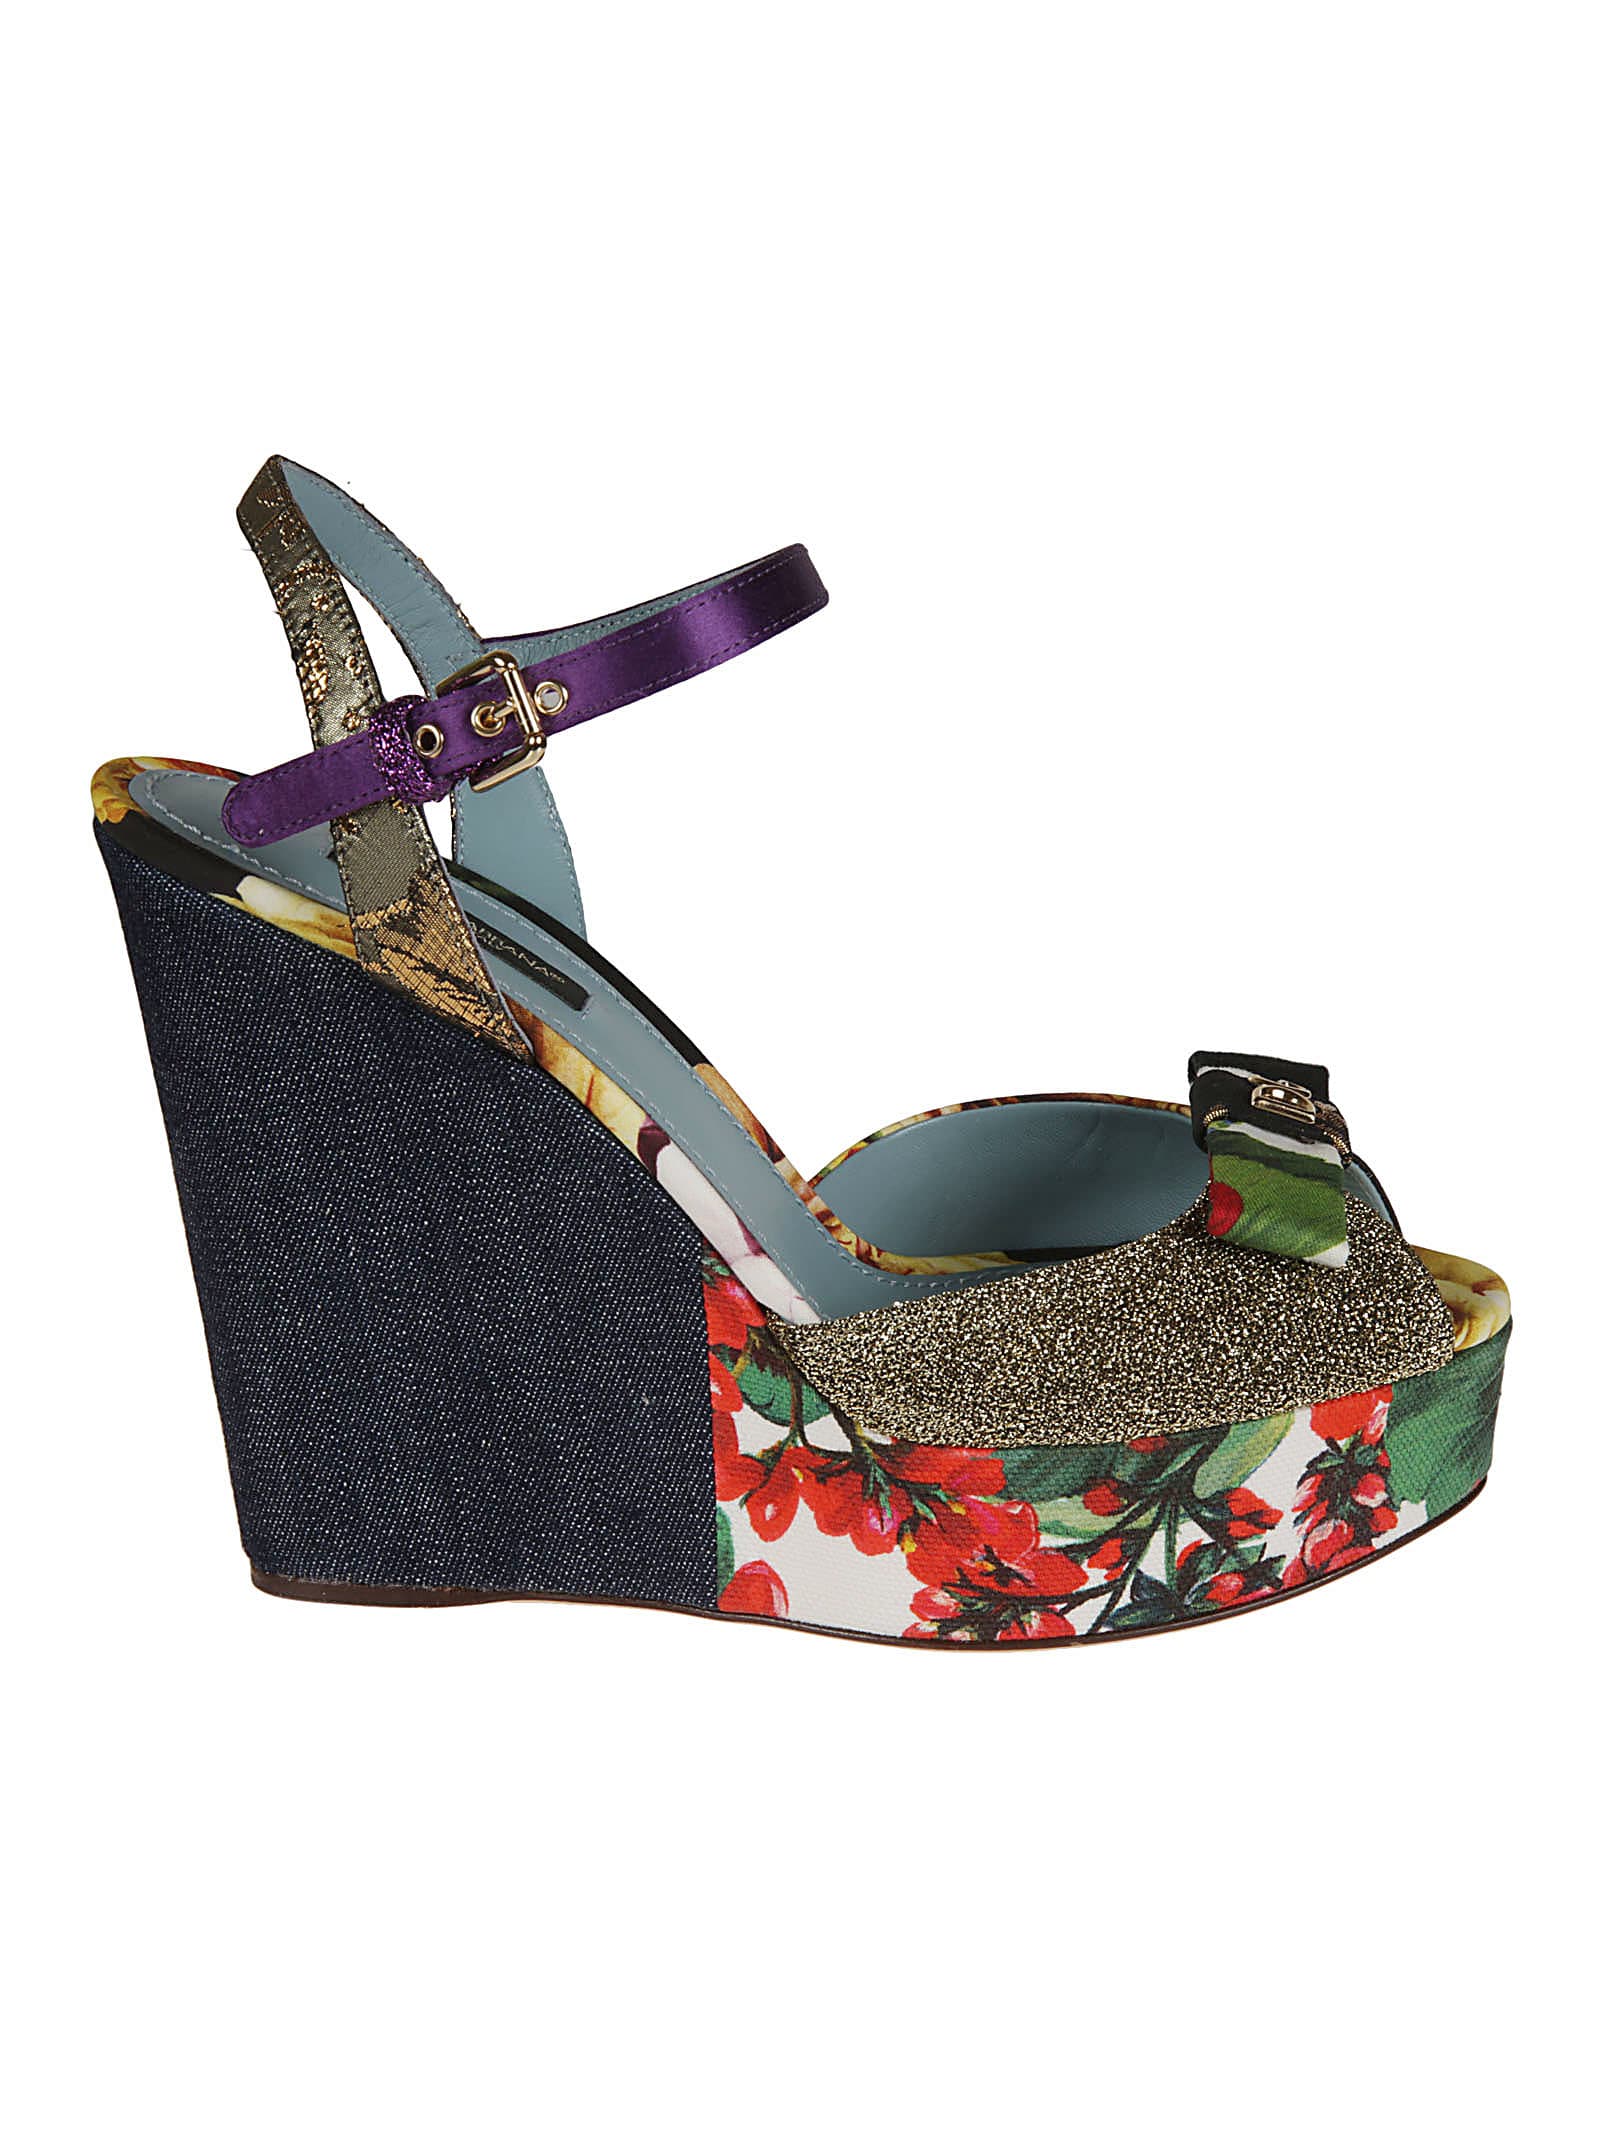 Buy Dolce & Gabbana Buckle Sided Strap Wedge Heel Sandals online, shop Dolce & Gabbana shoes with free shipping